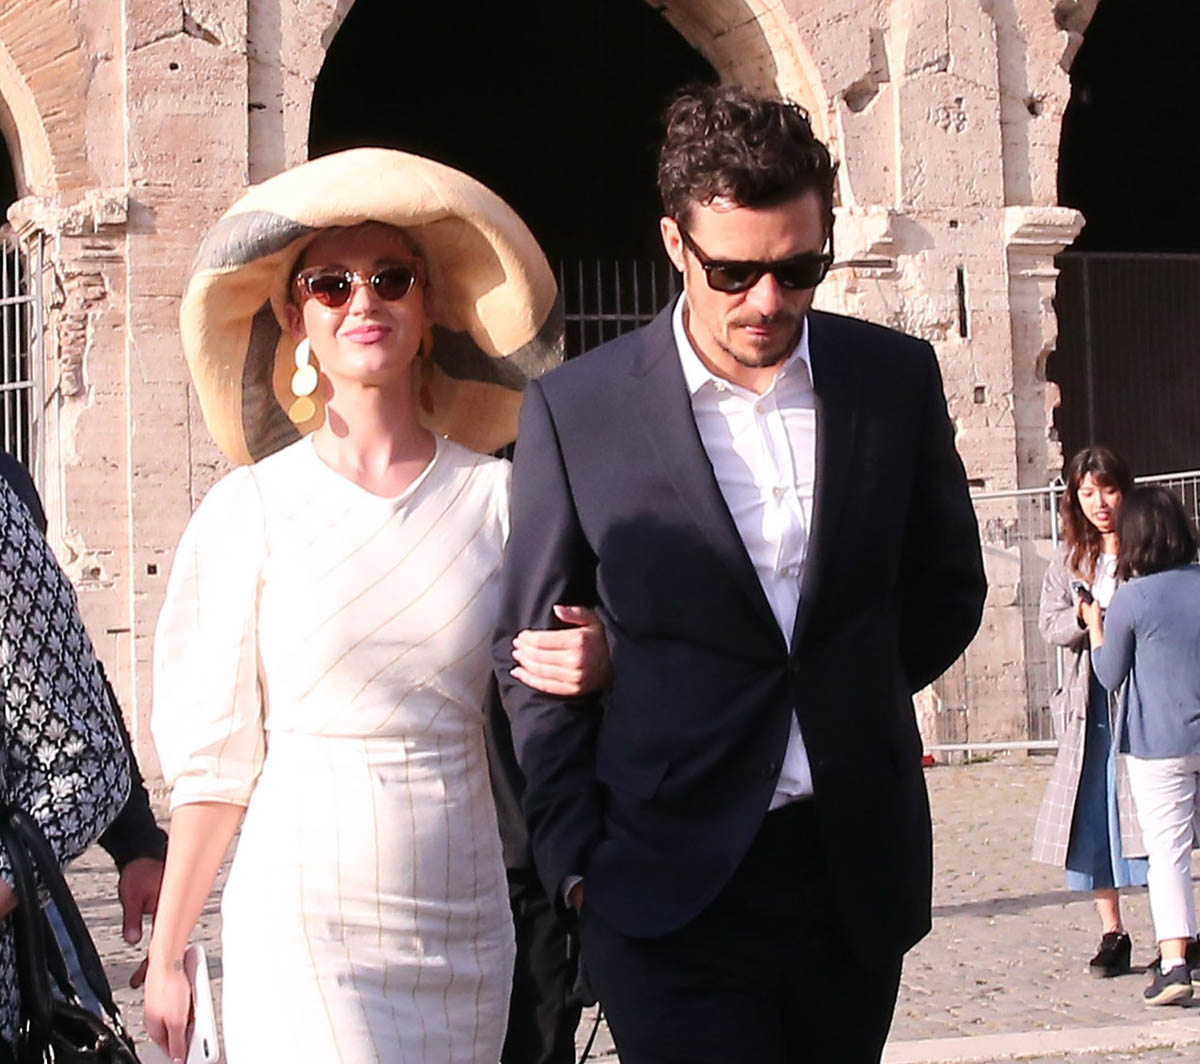 Katy Perry and Orlando Bloom back together in Rome